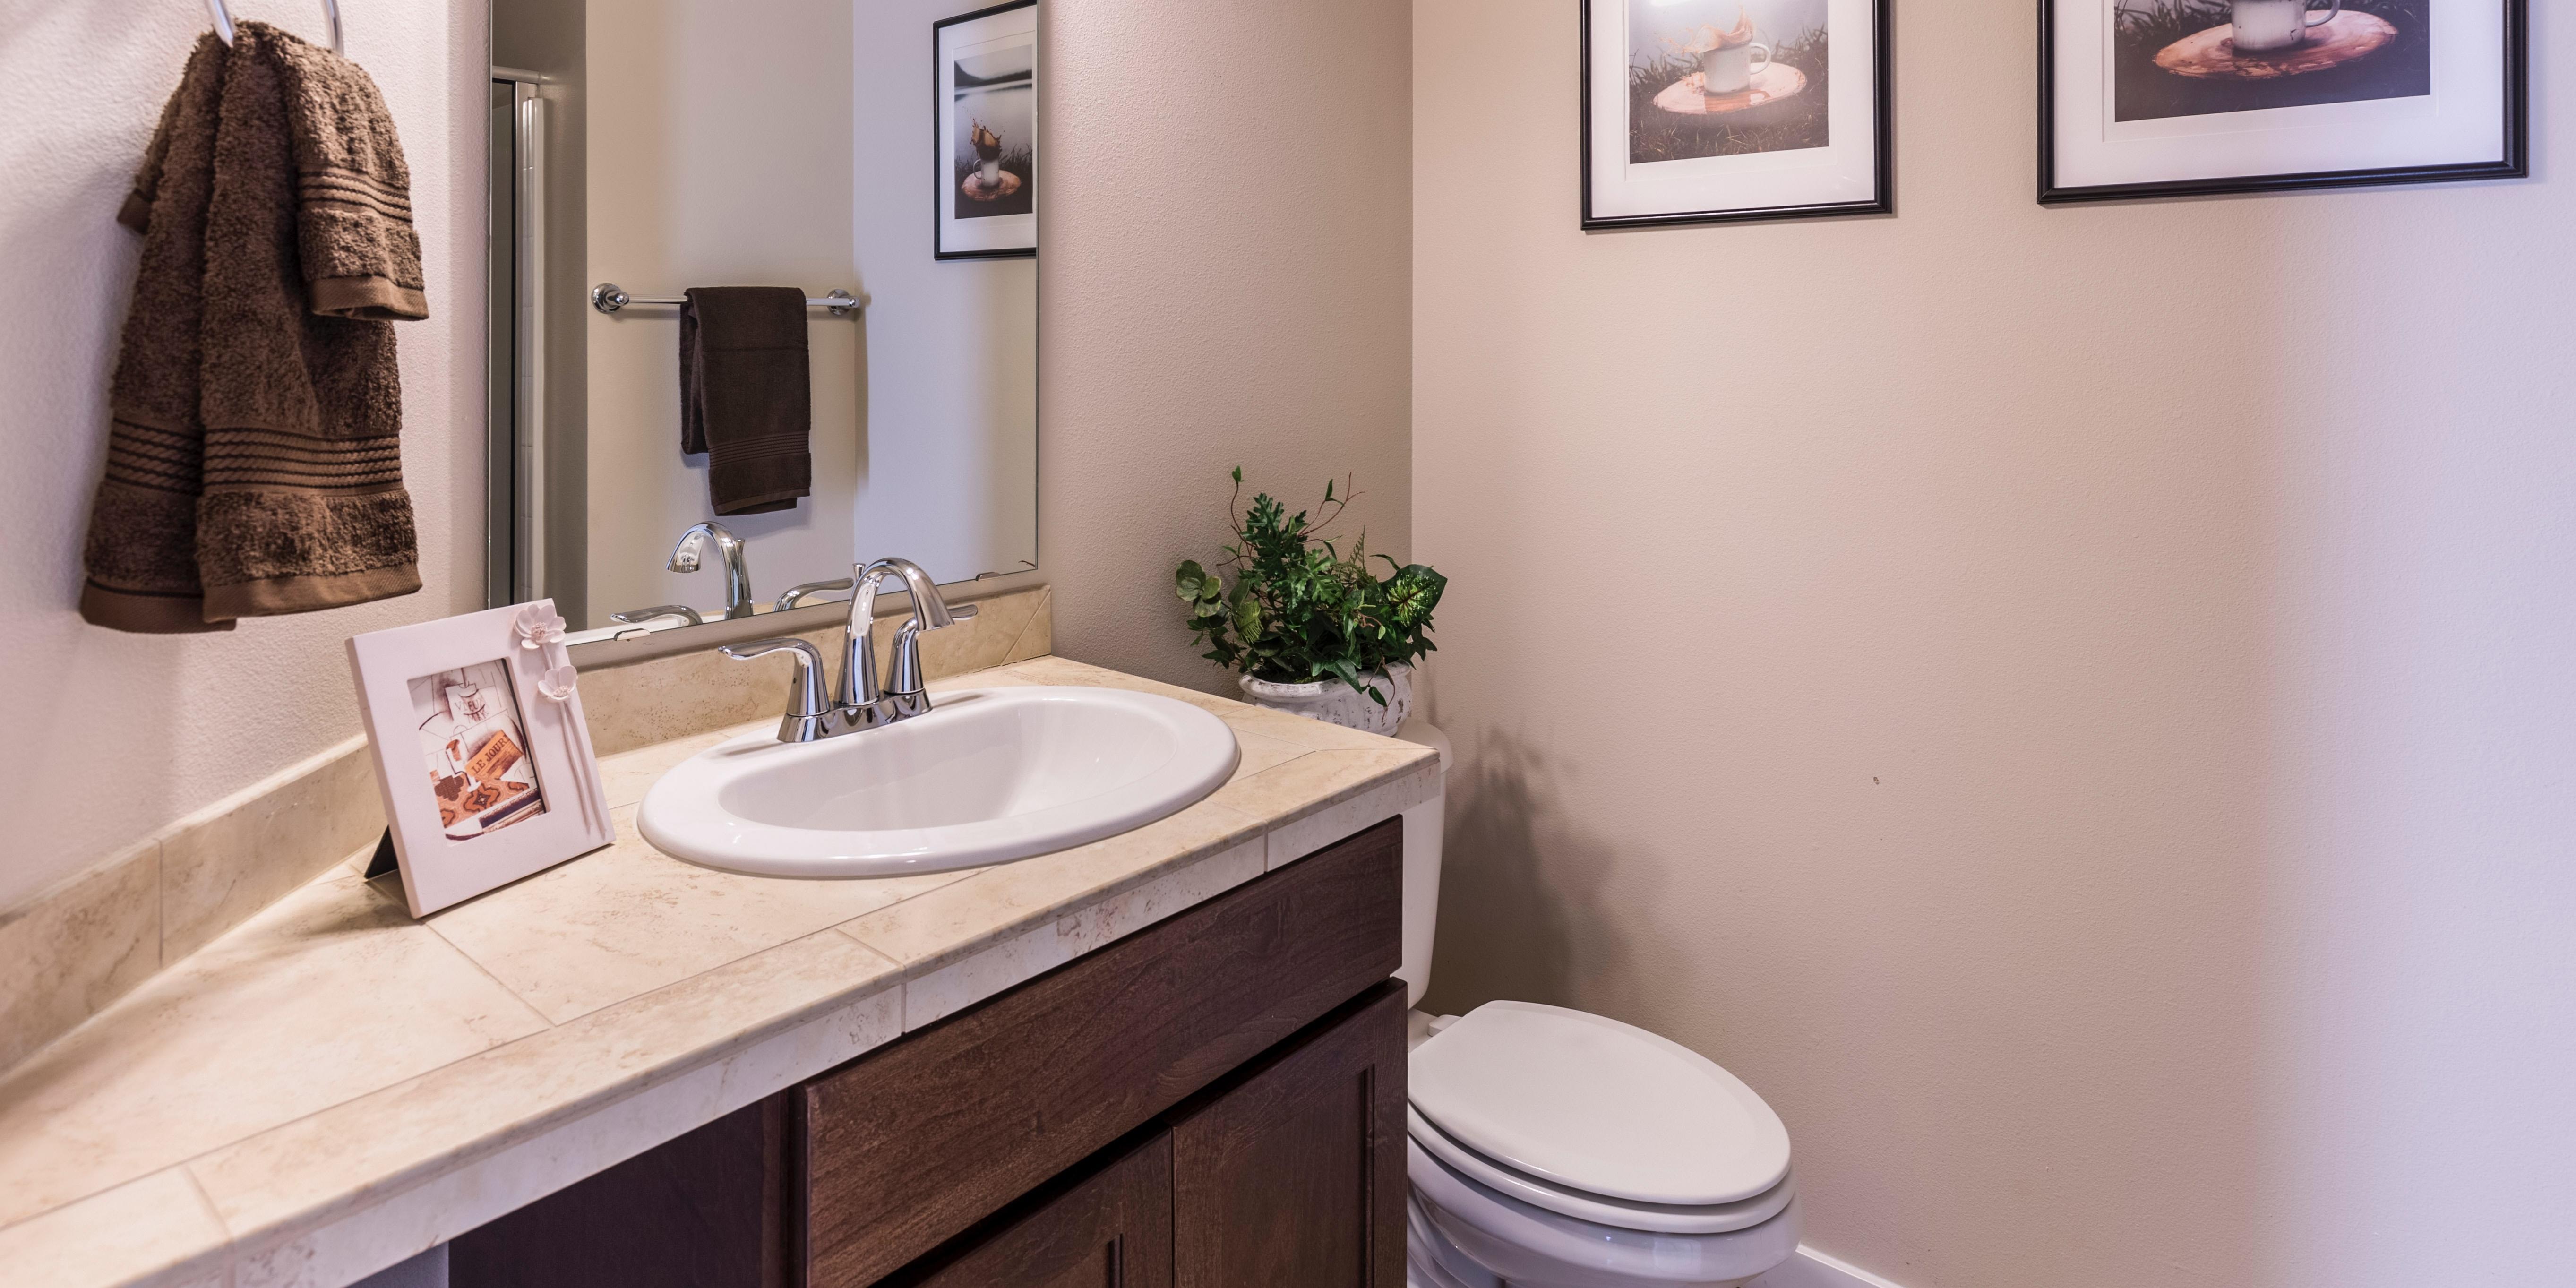 Can a downstairs toilet be removed from a home?